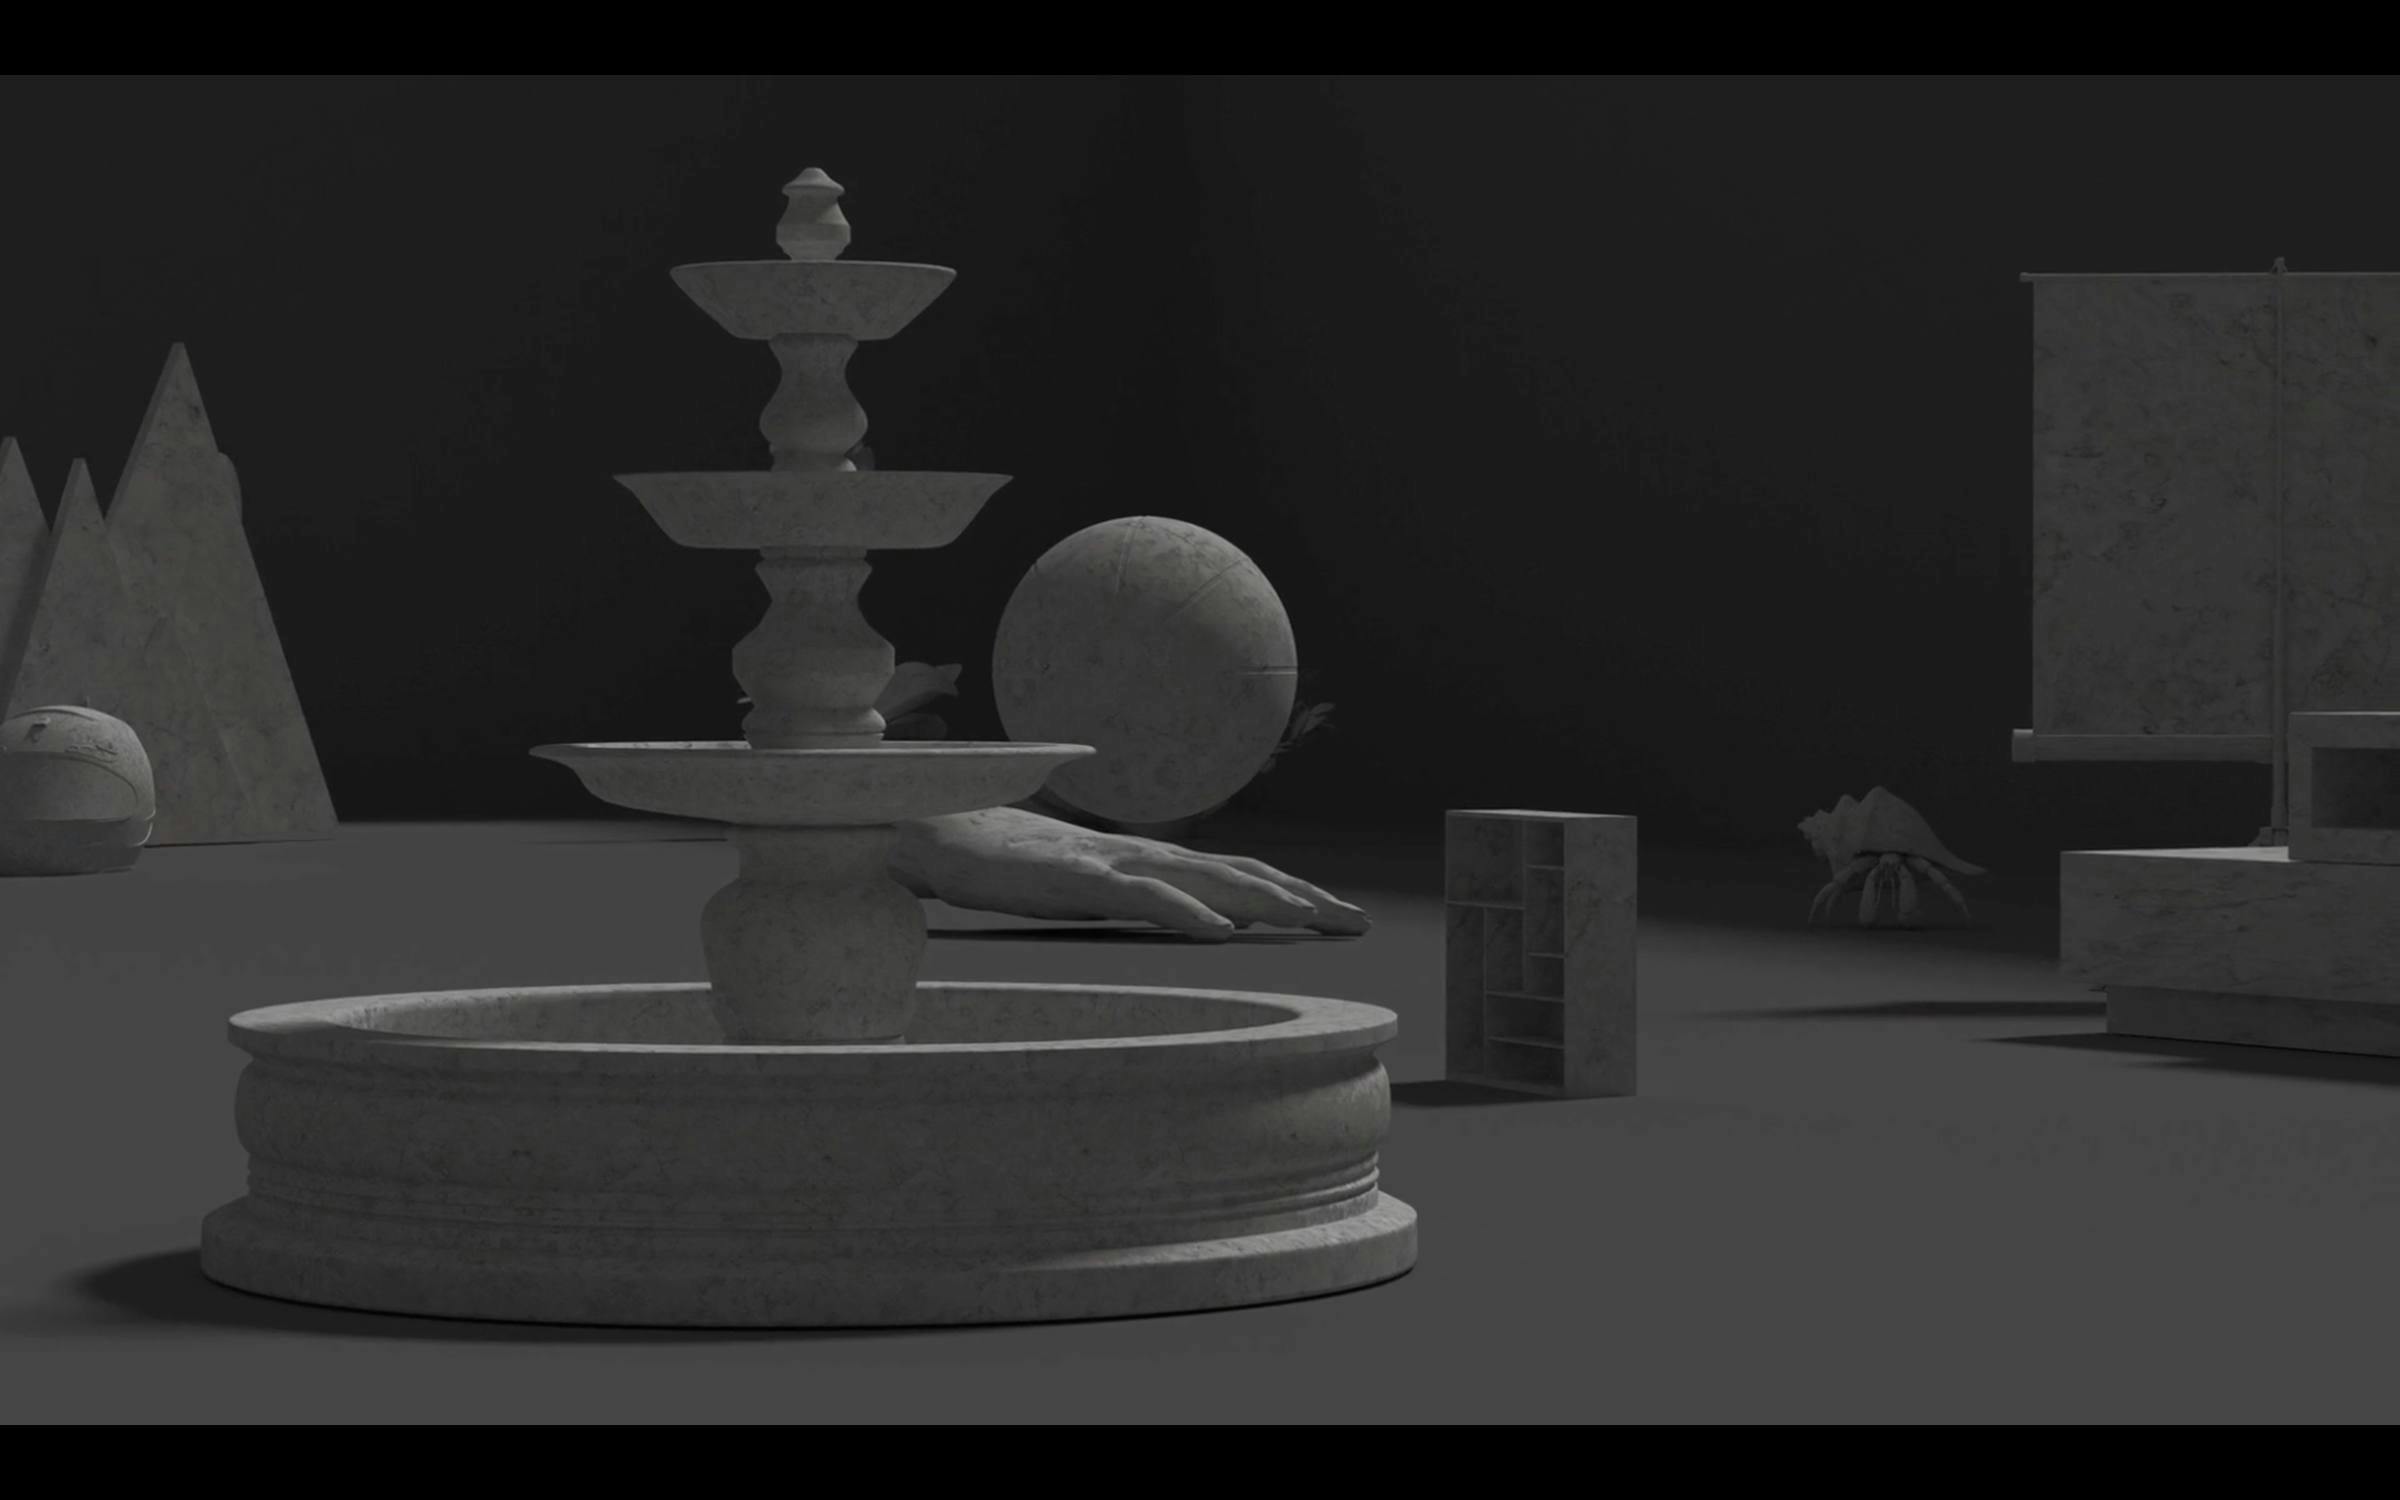 a digitally rendered black and white image of a fountain, pyramid, hand and sphere. There is a surreal element to this image